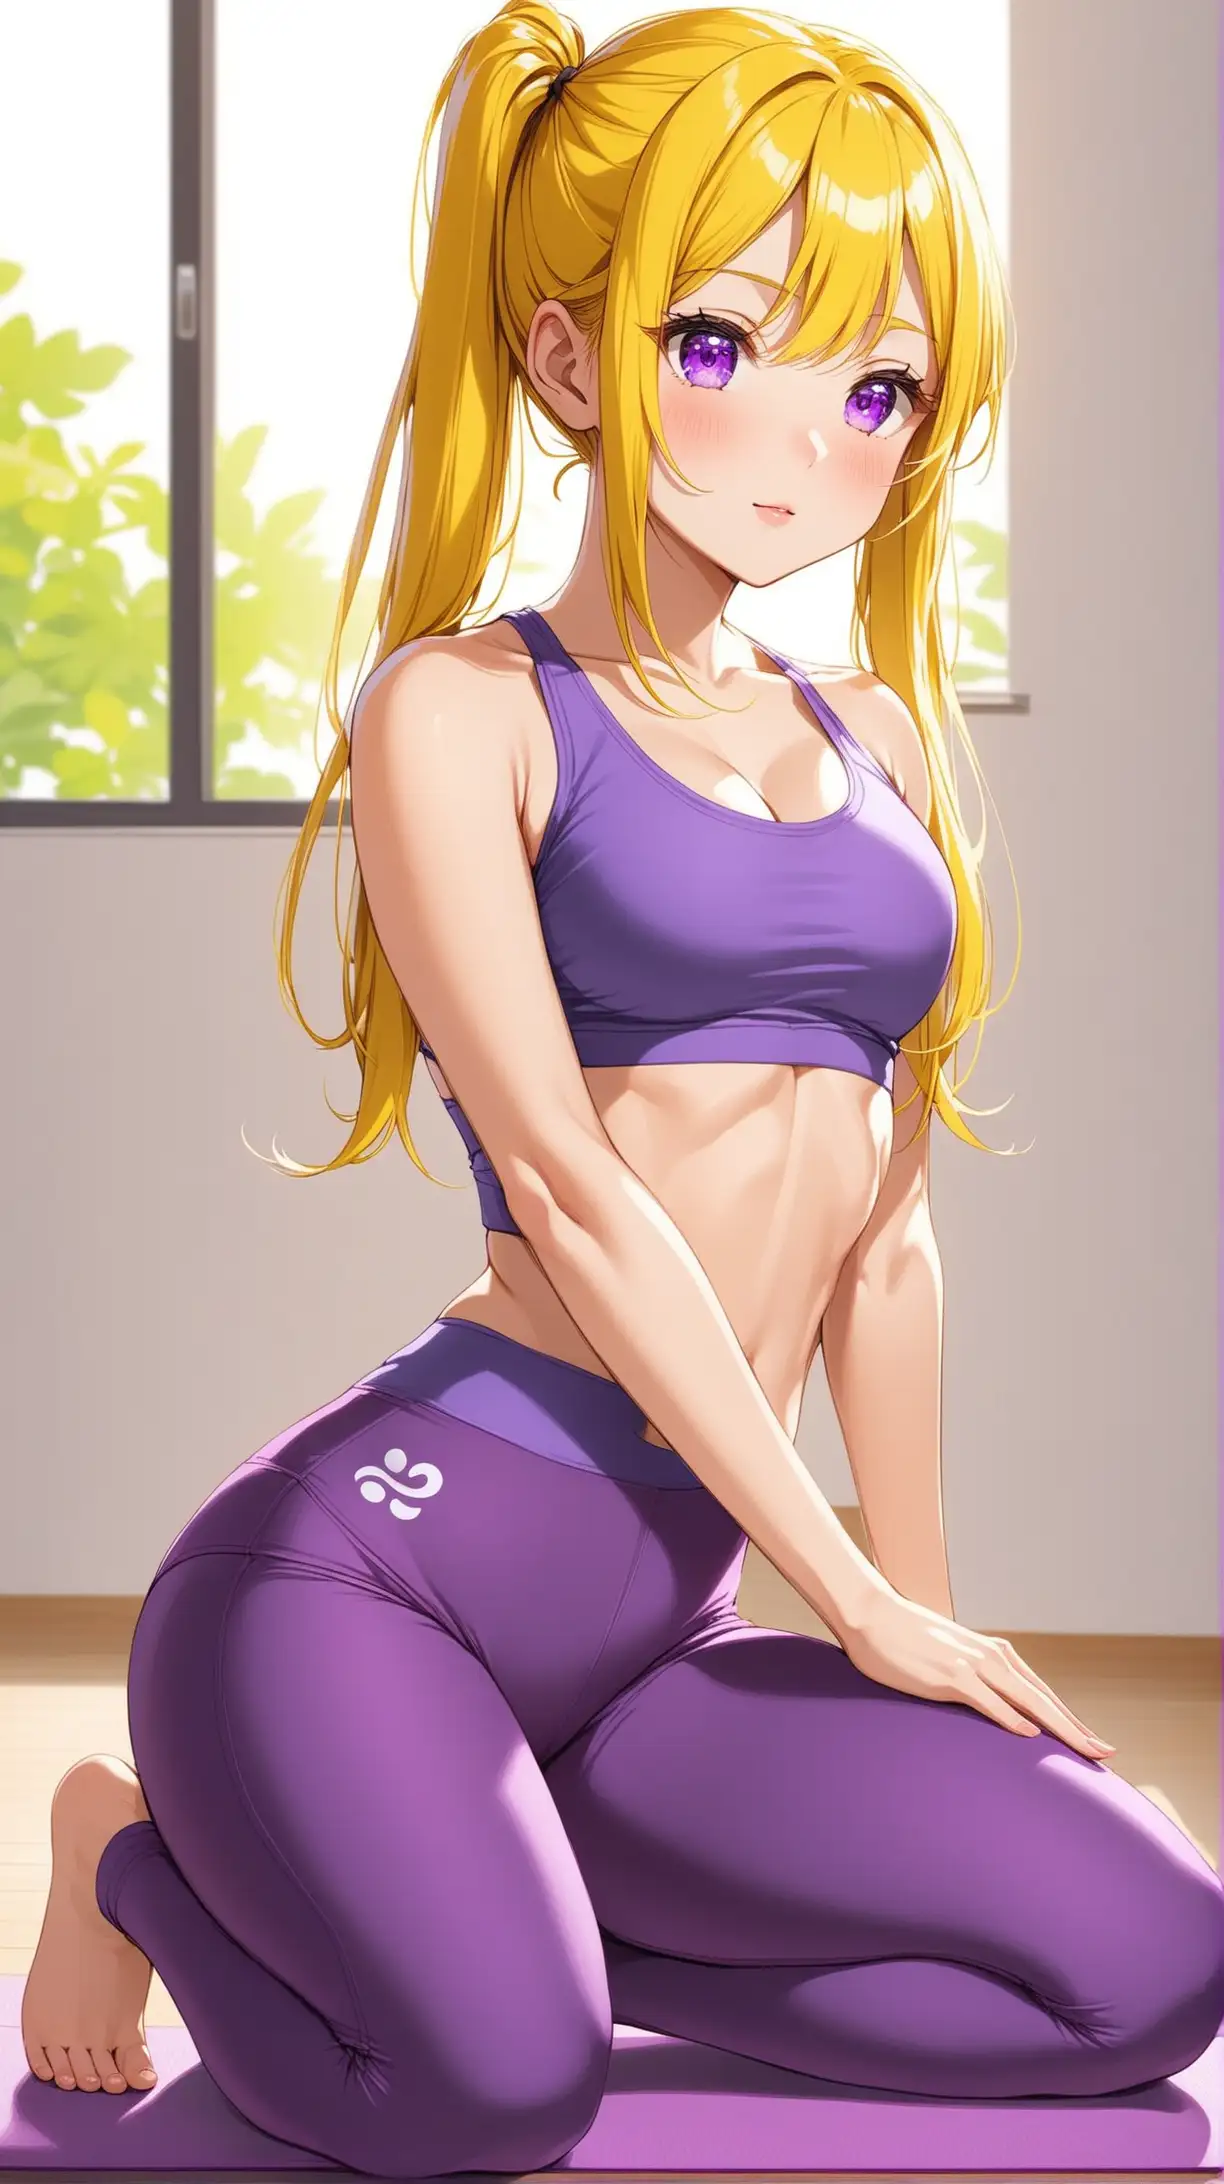 Girl with Yellow Pigtails and Purple Eyes in Yoga Pants